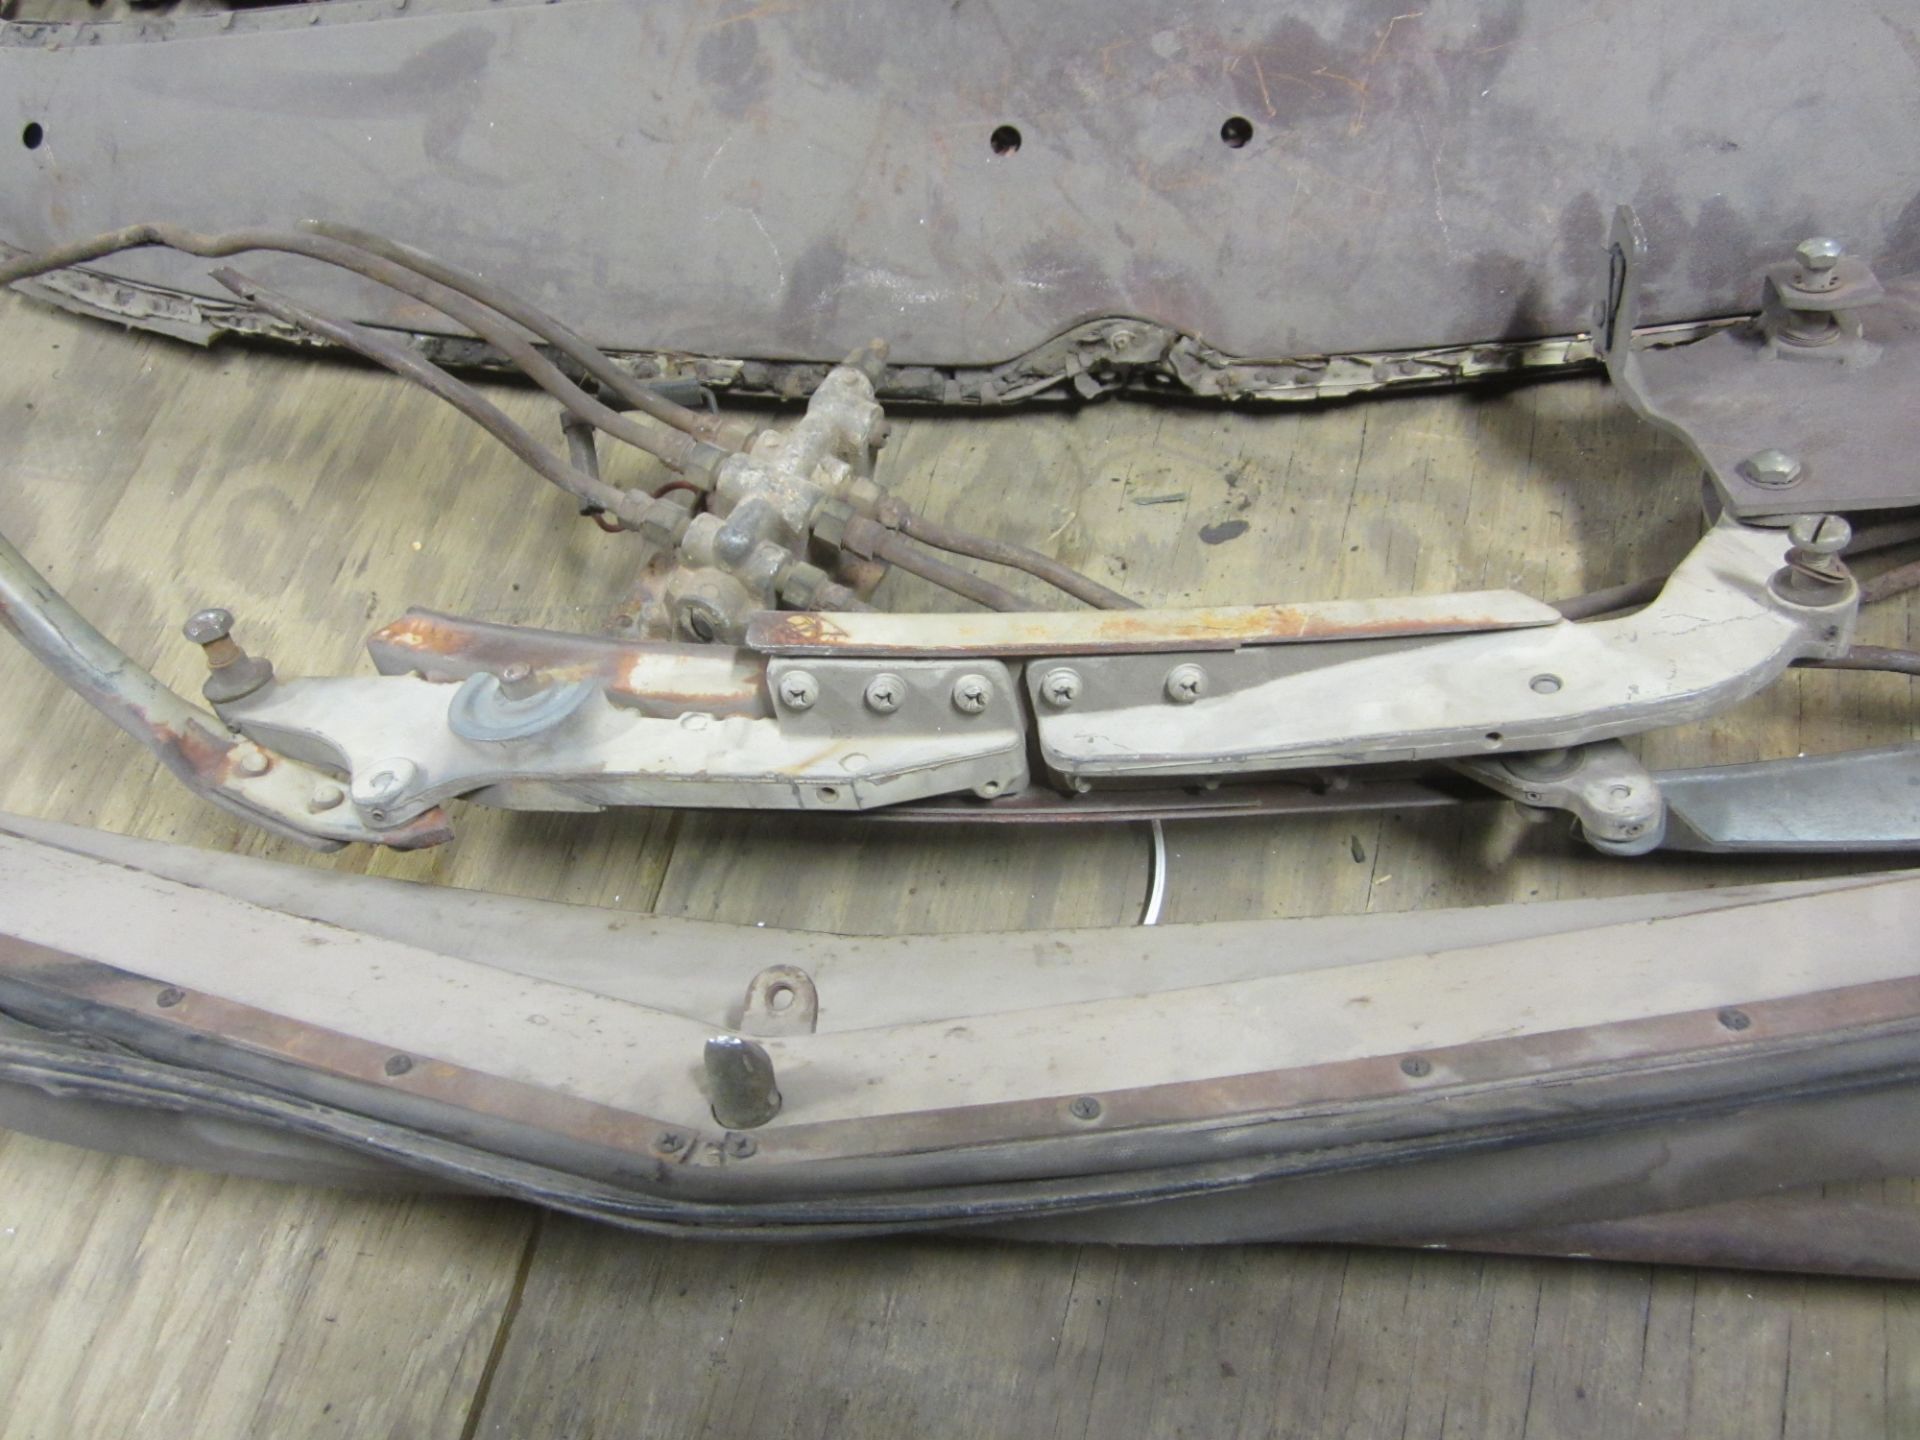 1951 Buick Convertible Top and Hardware - Image 3 of 4